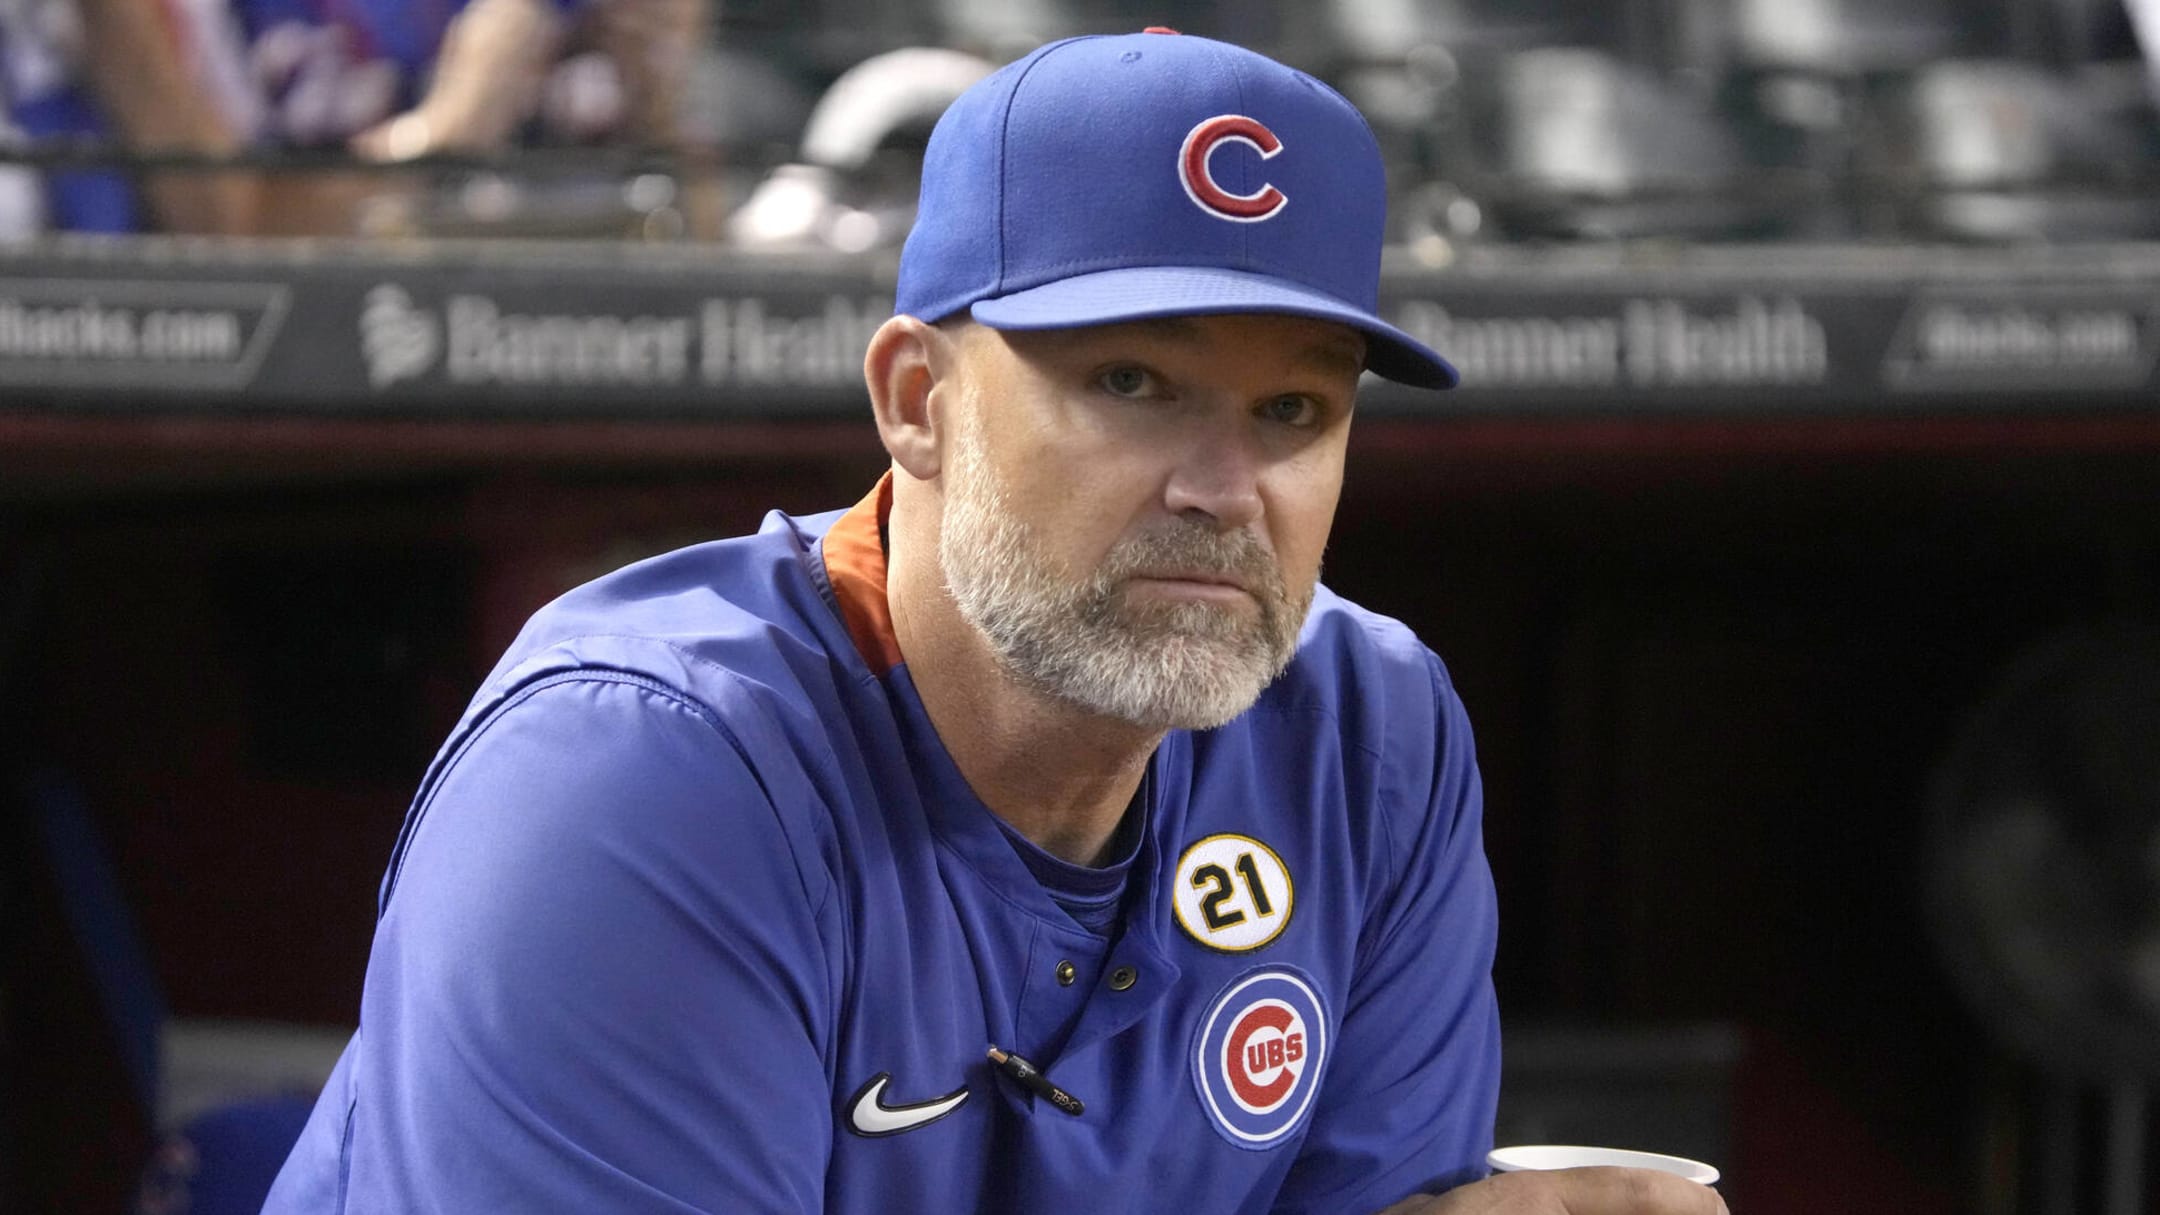 Chicago Cubs: David Ross Retires a World Series Champion!